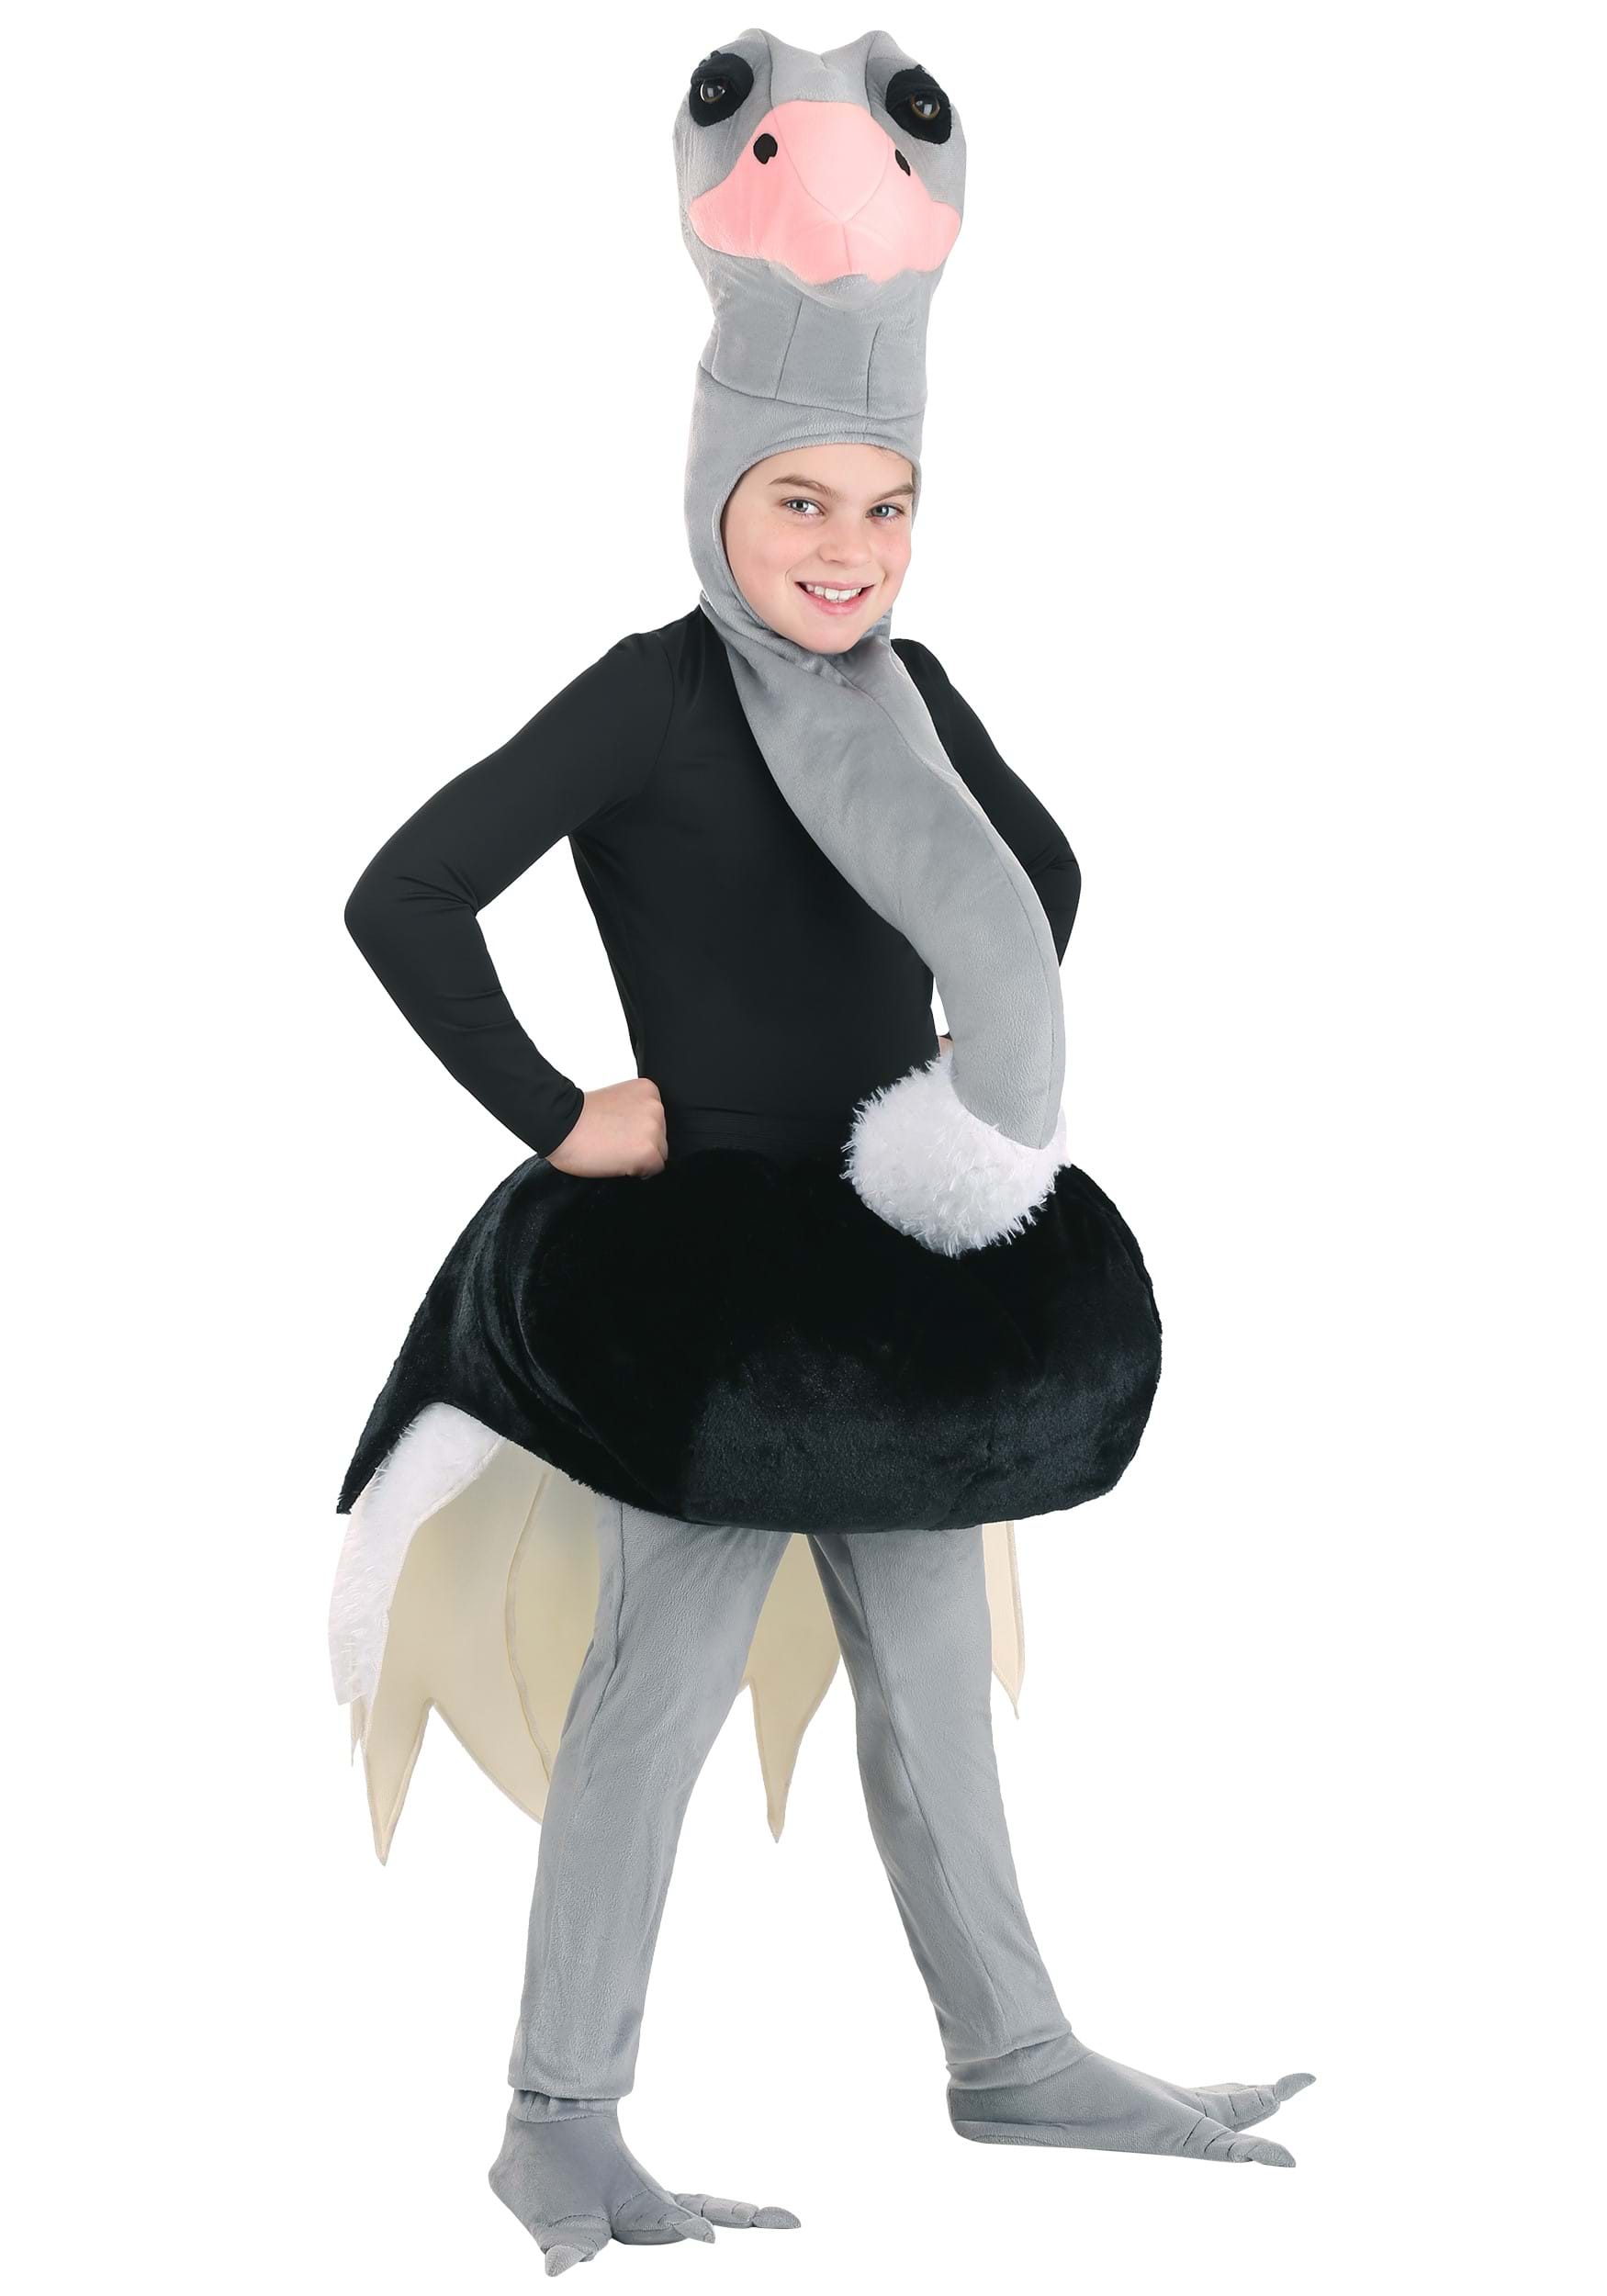 Photos - Fancy Dress FUN Costumes Ostrich Costume for Kid's Black/Pink/Gray FUN6829CH